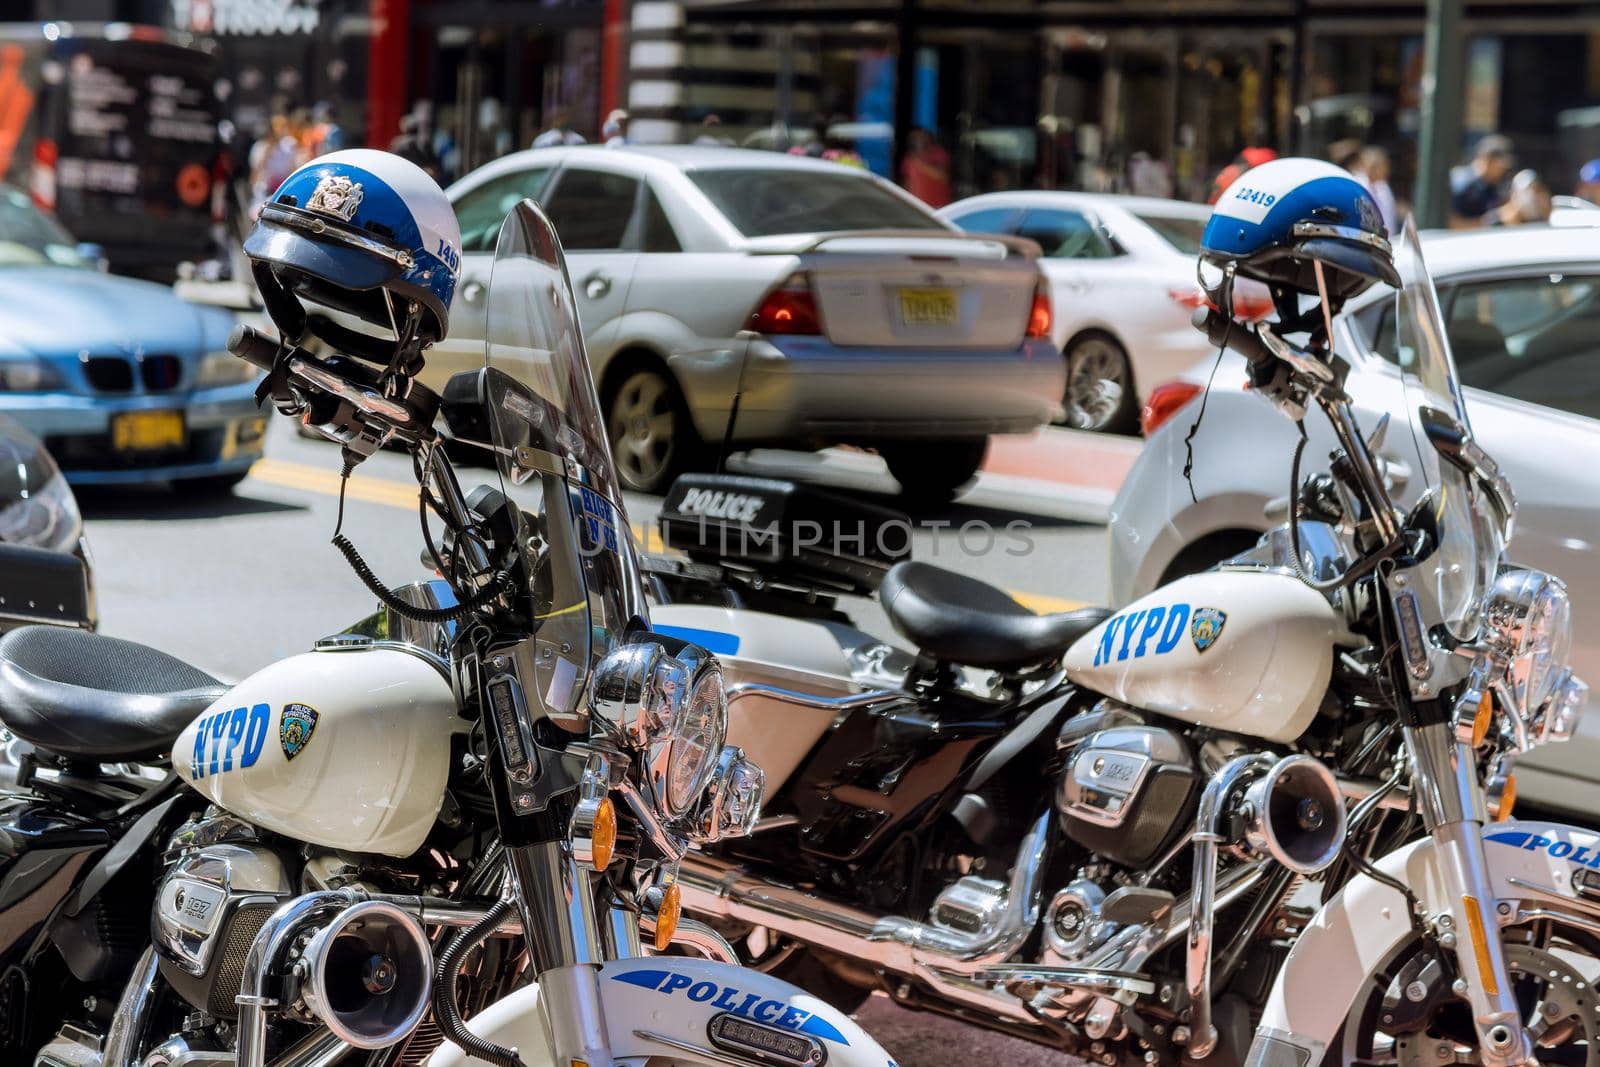 18 June 2021 New York, USA: NYPD Patrol motorcycles parked on the New York City near Time Square, Manhattan